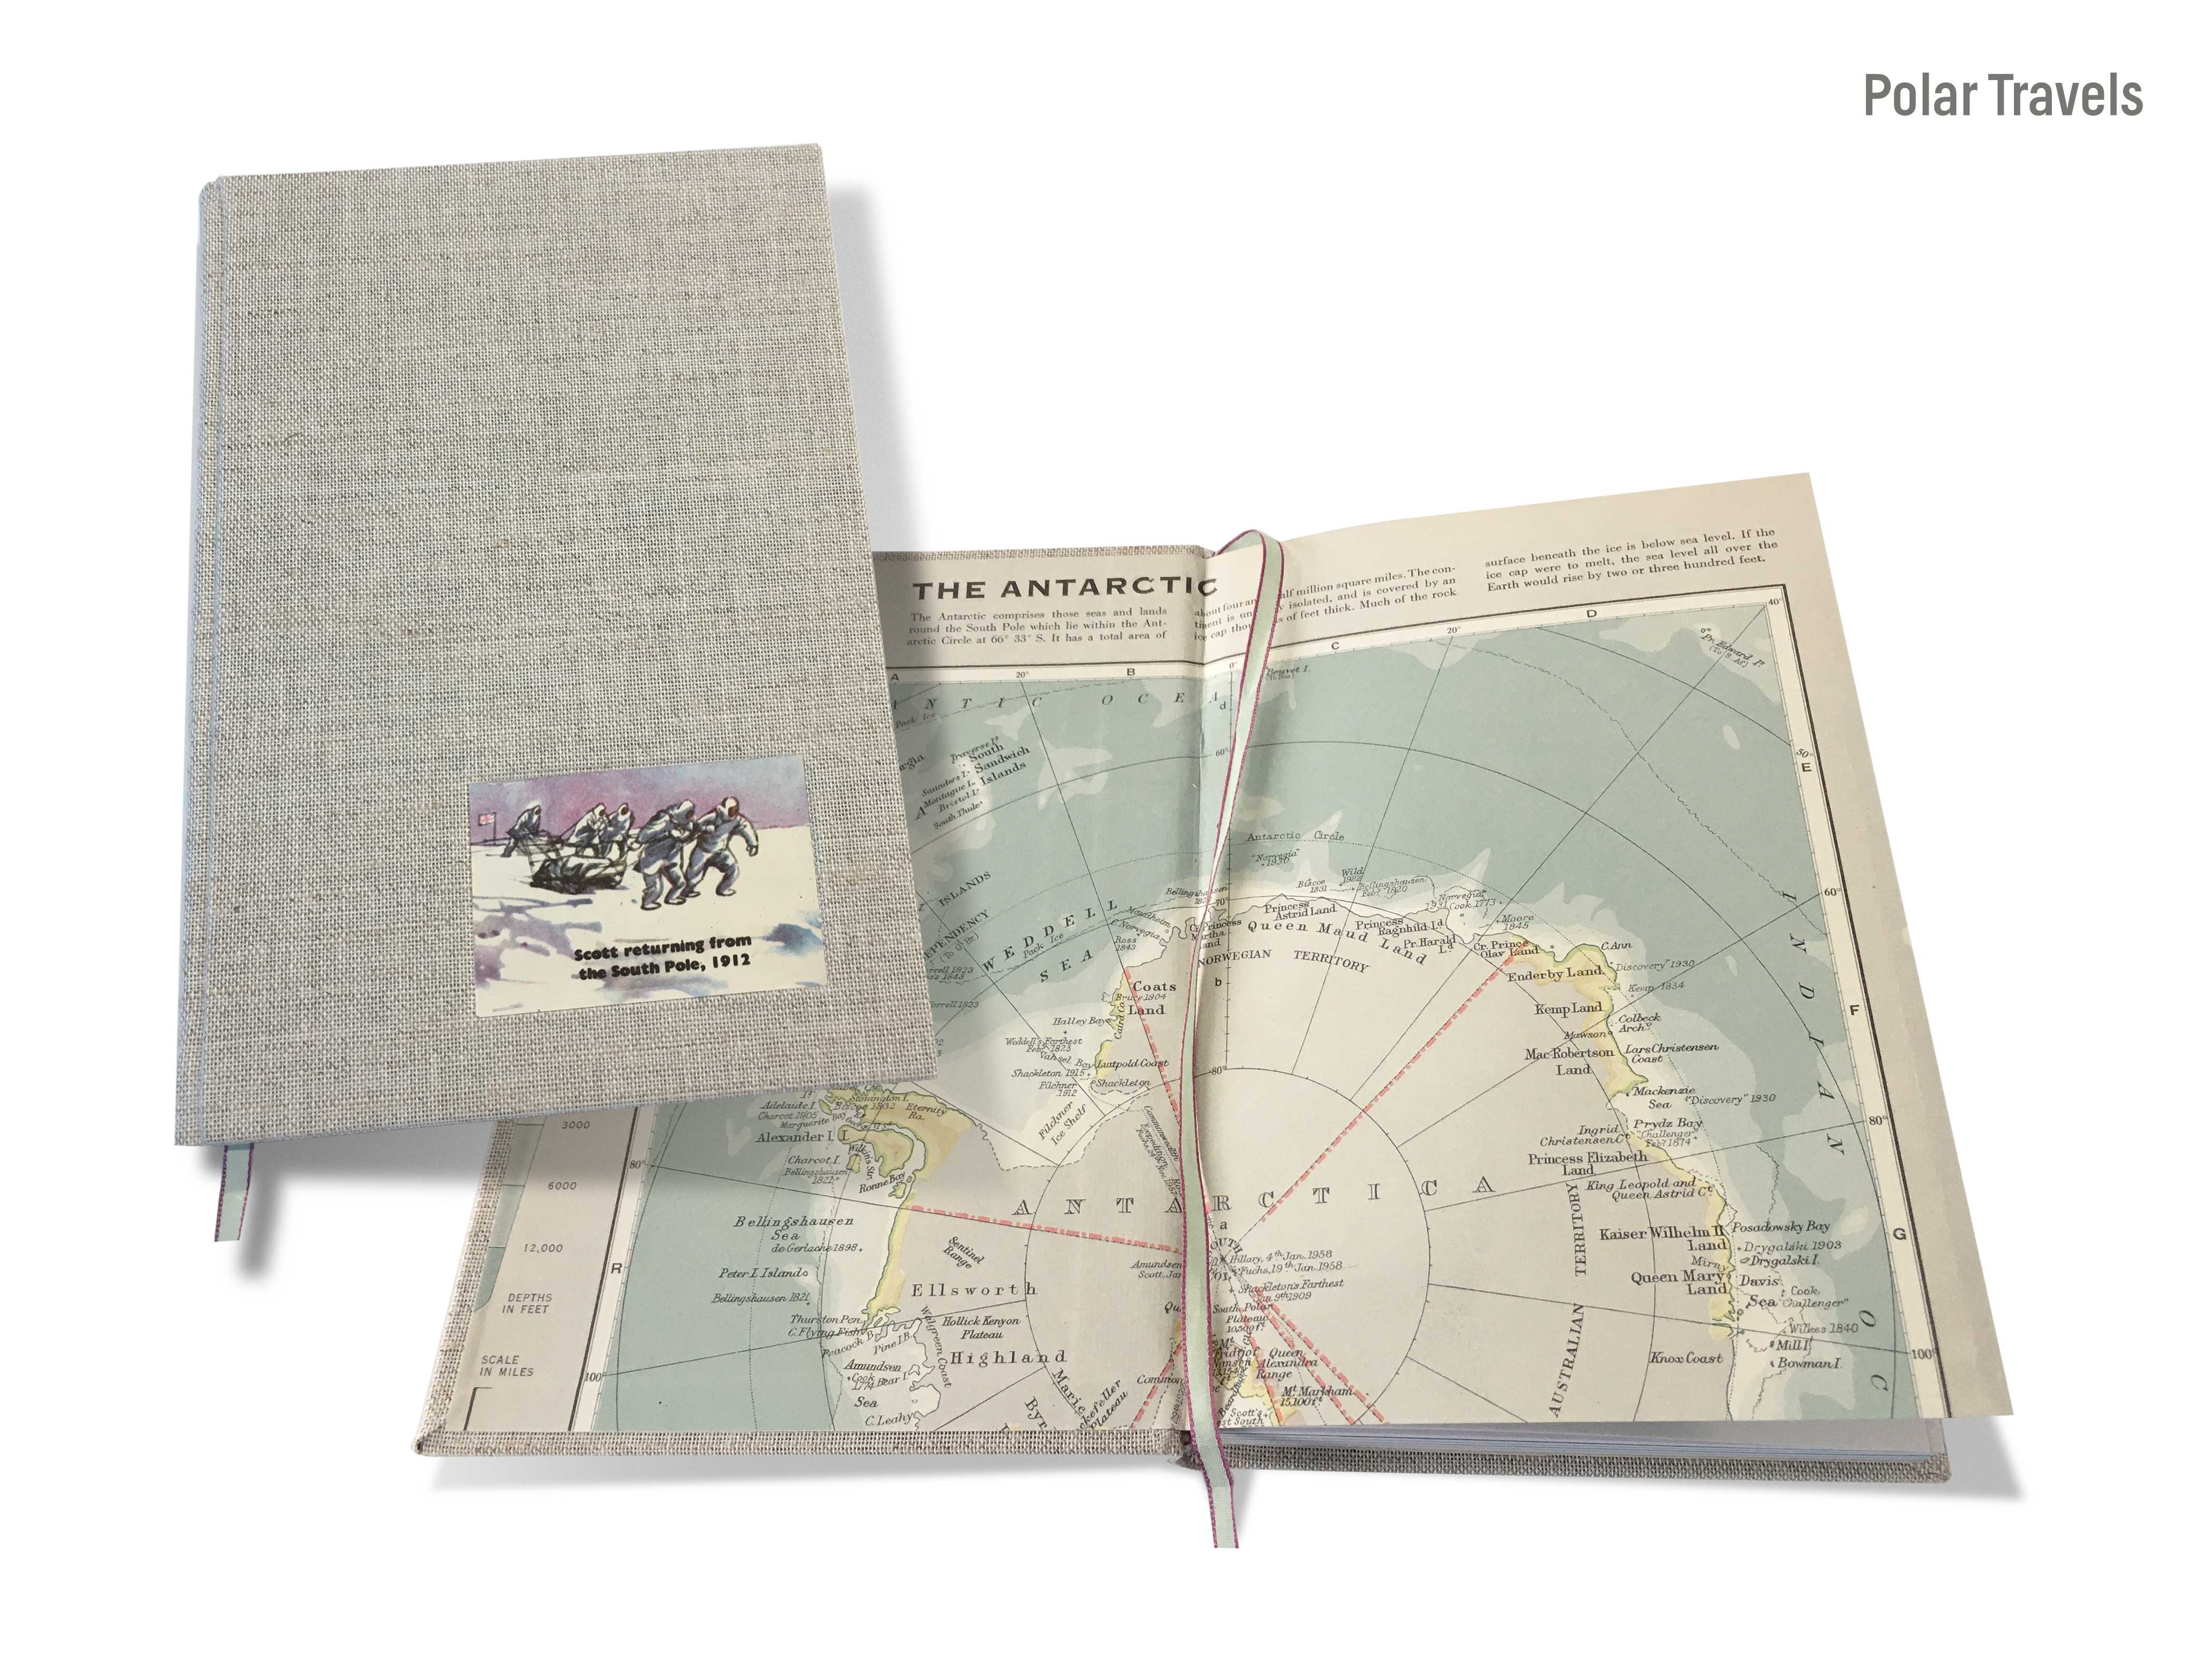 A montage image of a cover and a double-page spread of the hand-made journal titled, ‘Polar travels’ by Michael Small, featuring a light grey linen cover with a watercolour of Scott returning from the South Pole, 1912 and a double-page spread with a map of Antarctica.